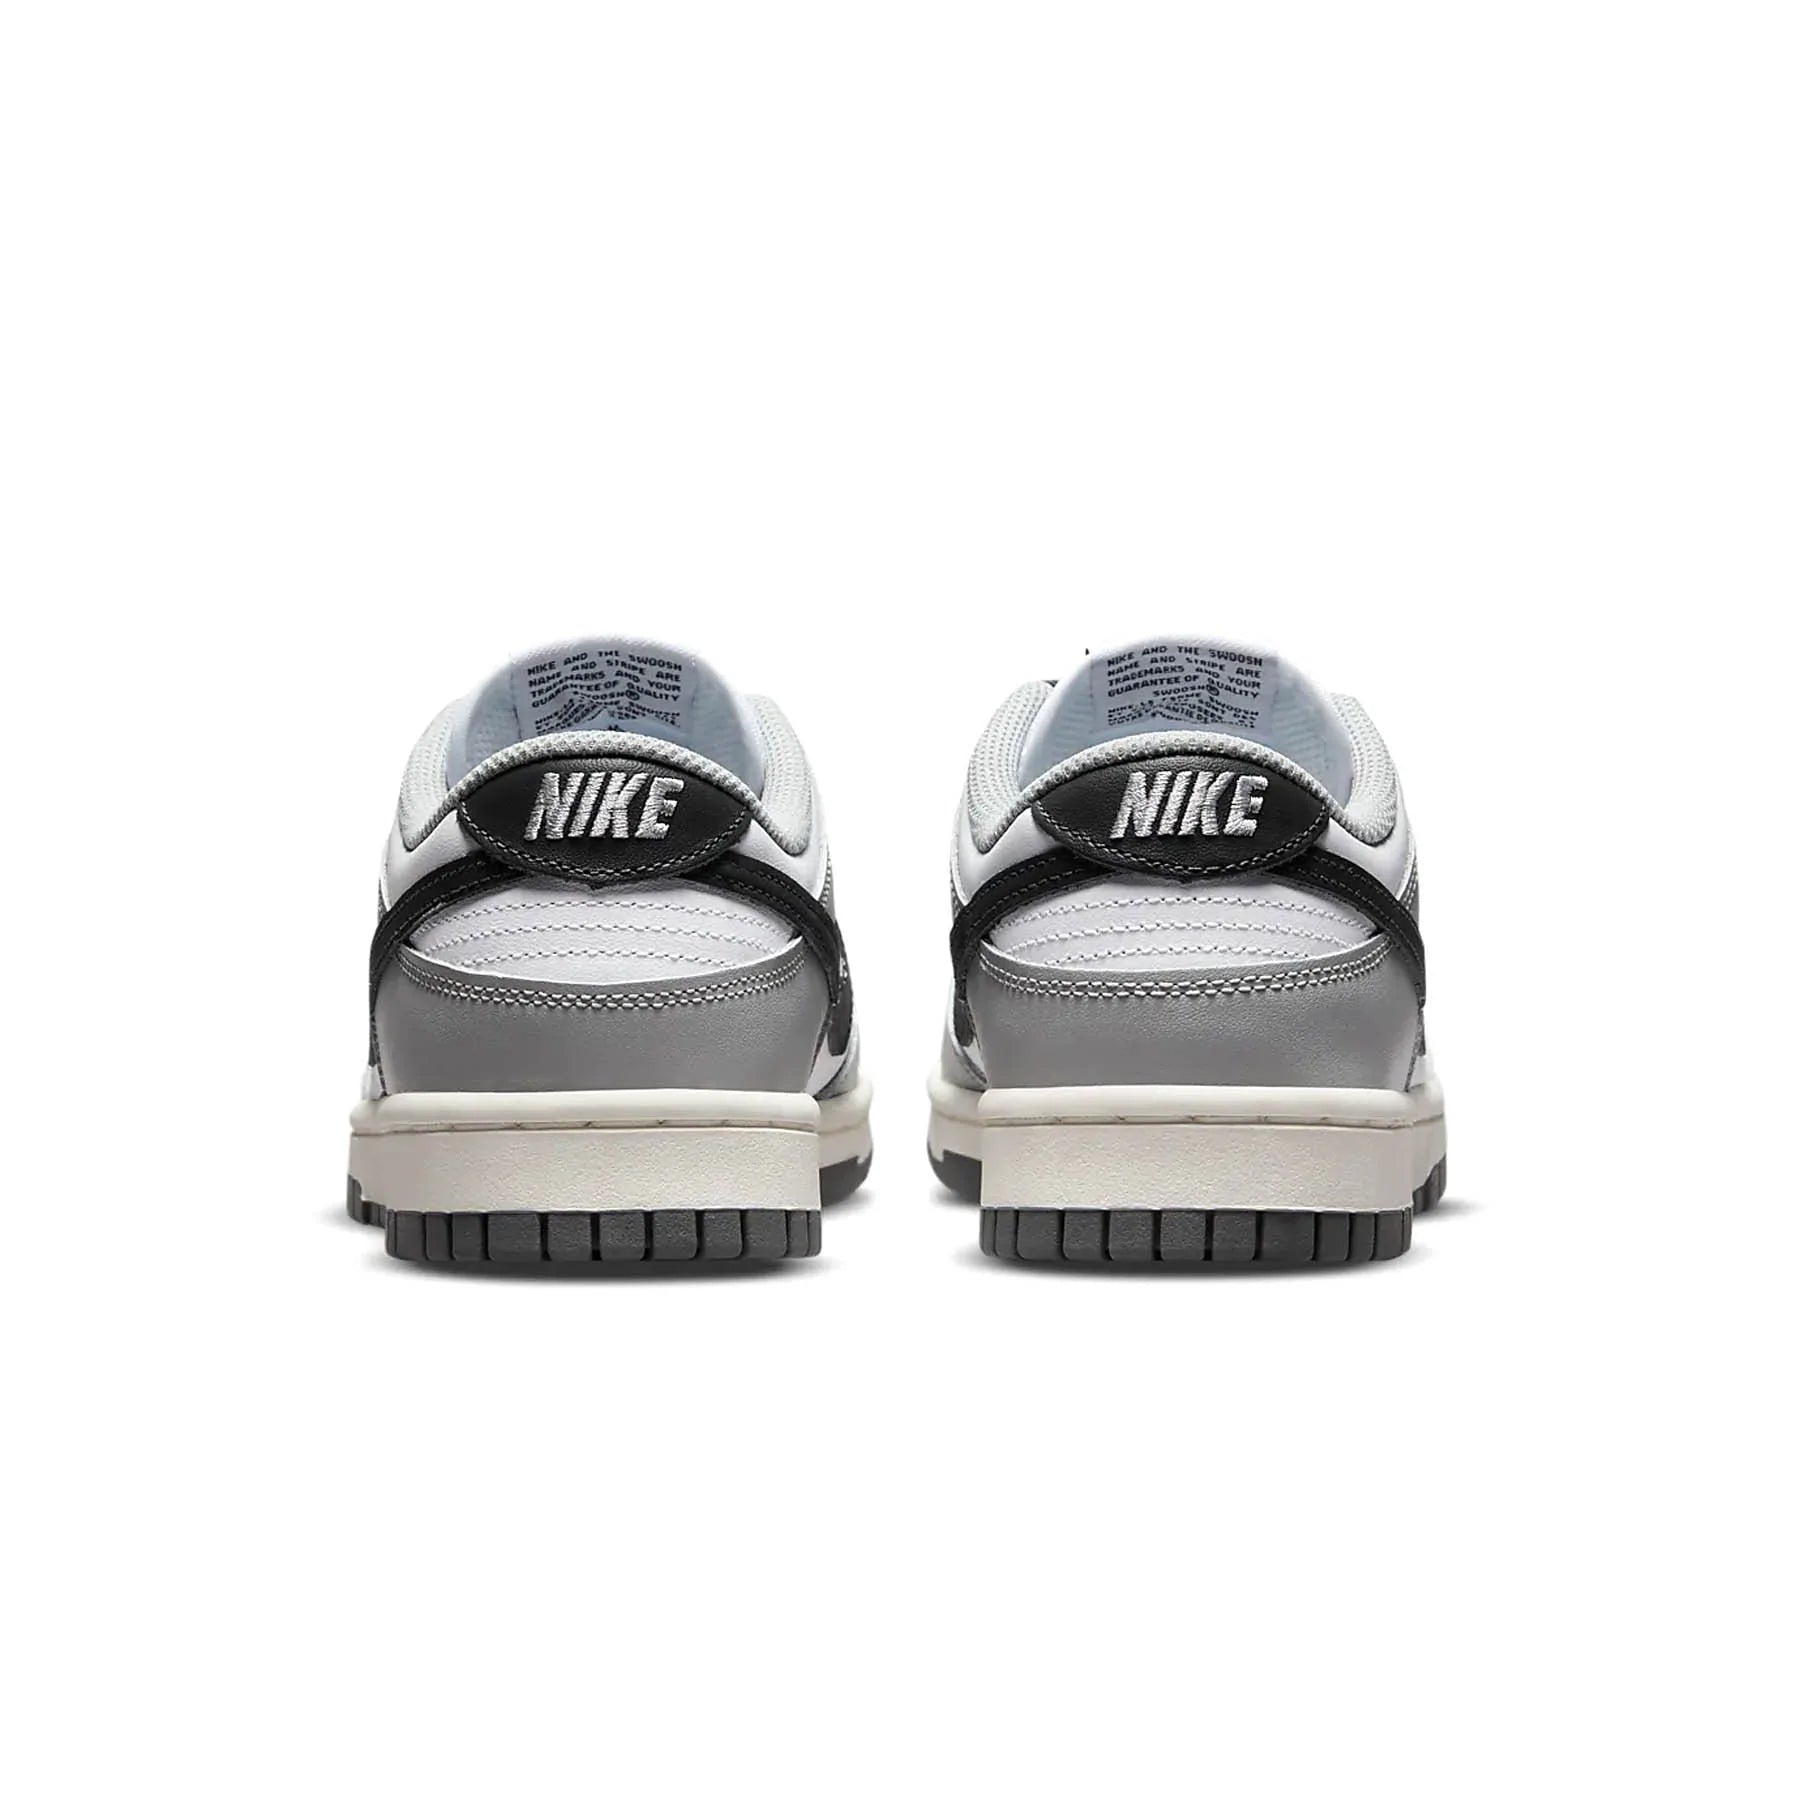 Double Boxed  229.99 Nike Dunk Low Light Smoke Grey (W) Double Boxed